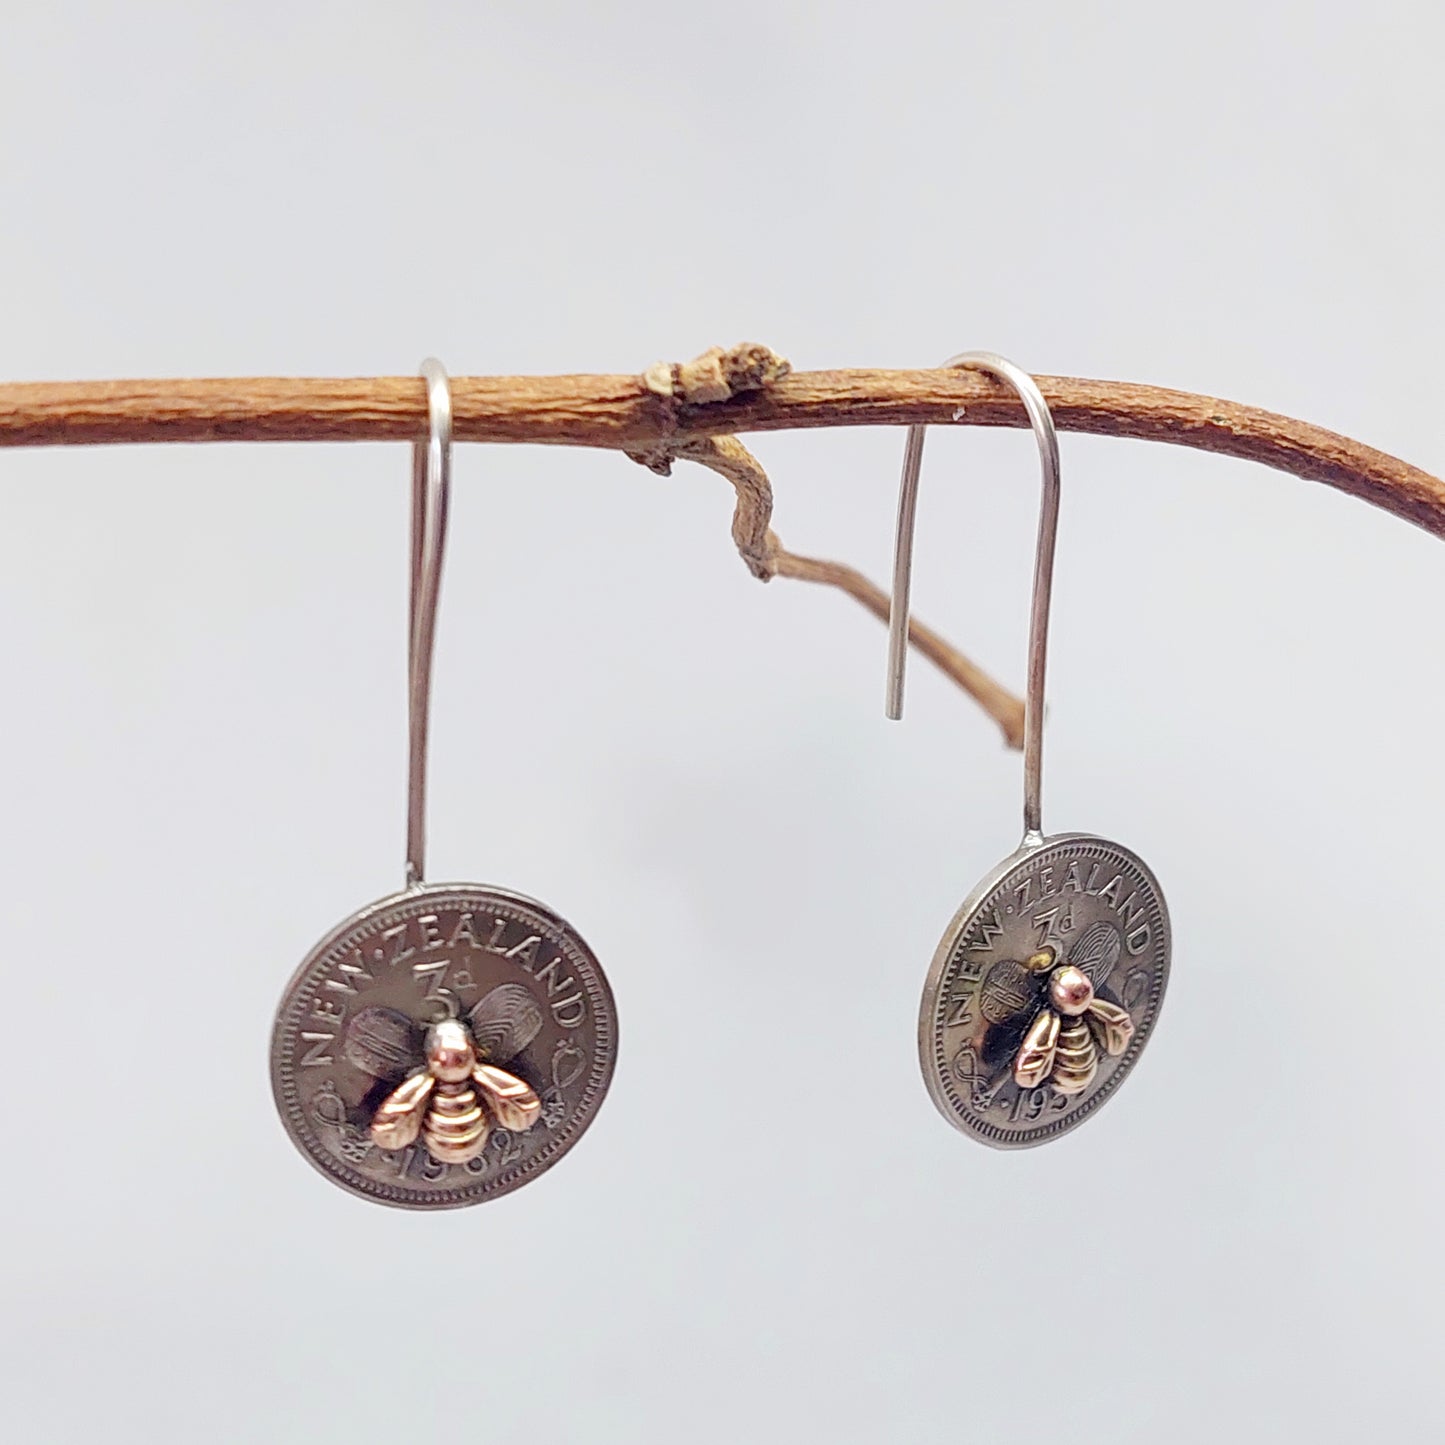 BESTSELLER! NEW!! Re-minted Artisan Coin Earrings with Tiny Bees - Threepence